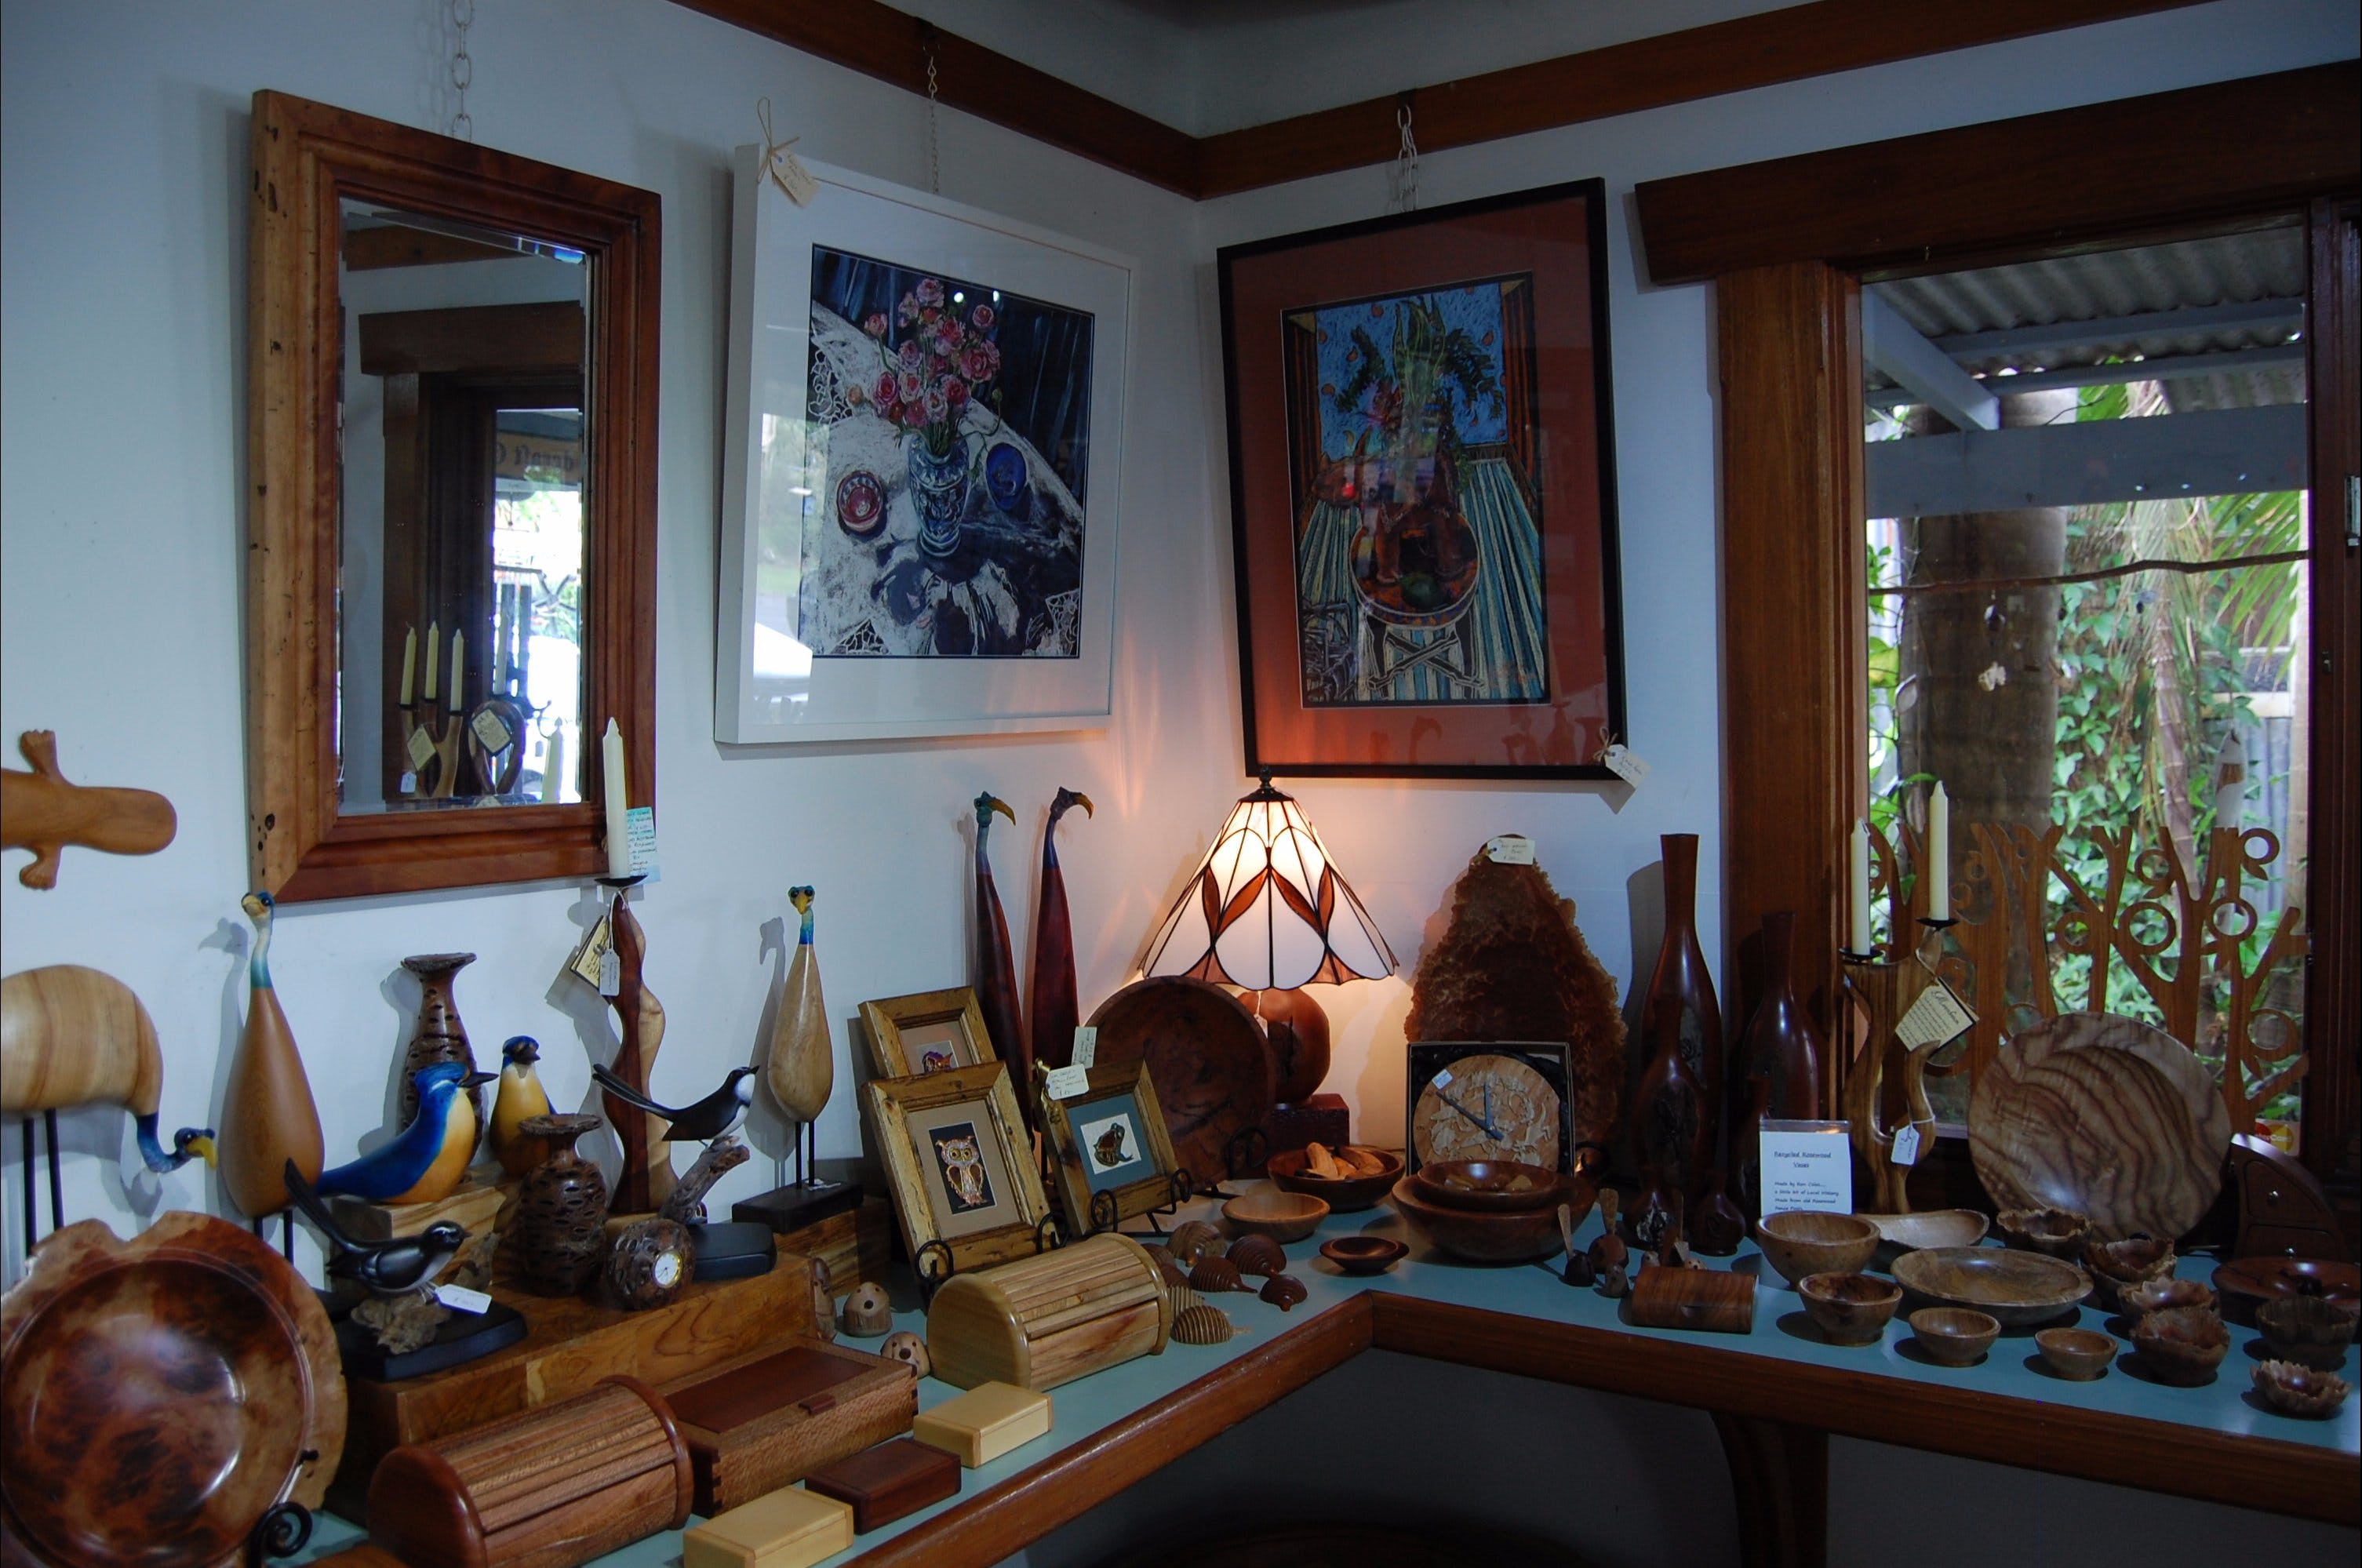 The Woodcraft Gallery - Find Attractions